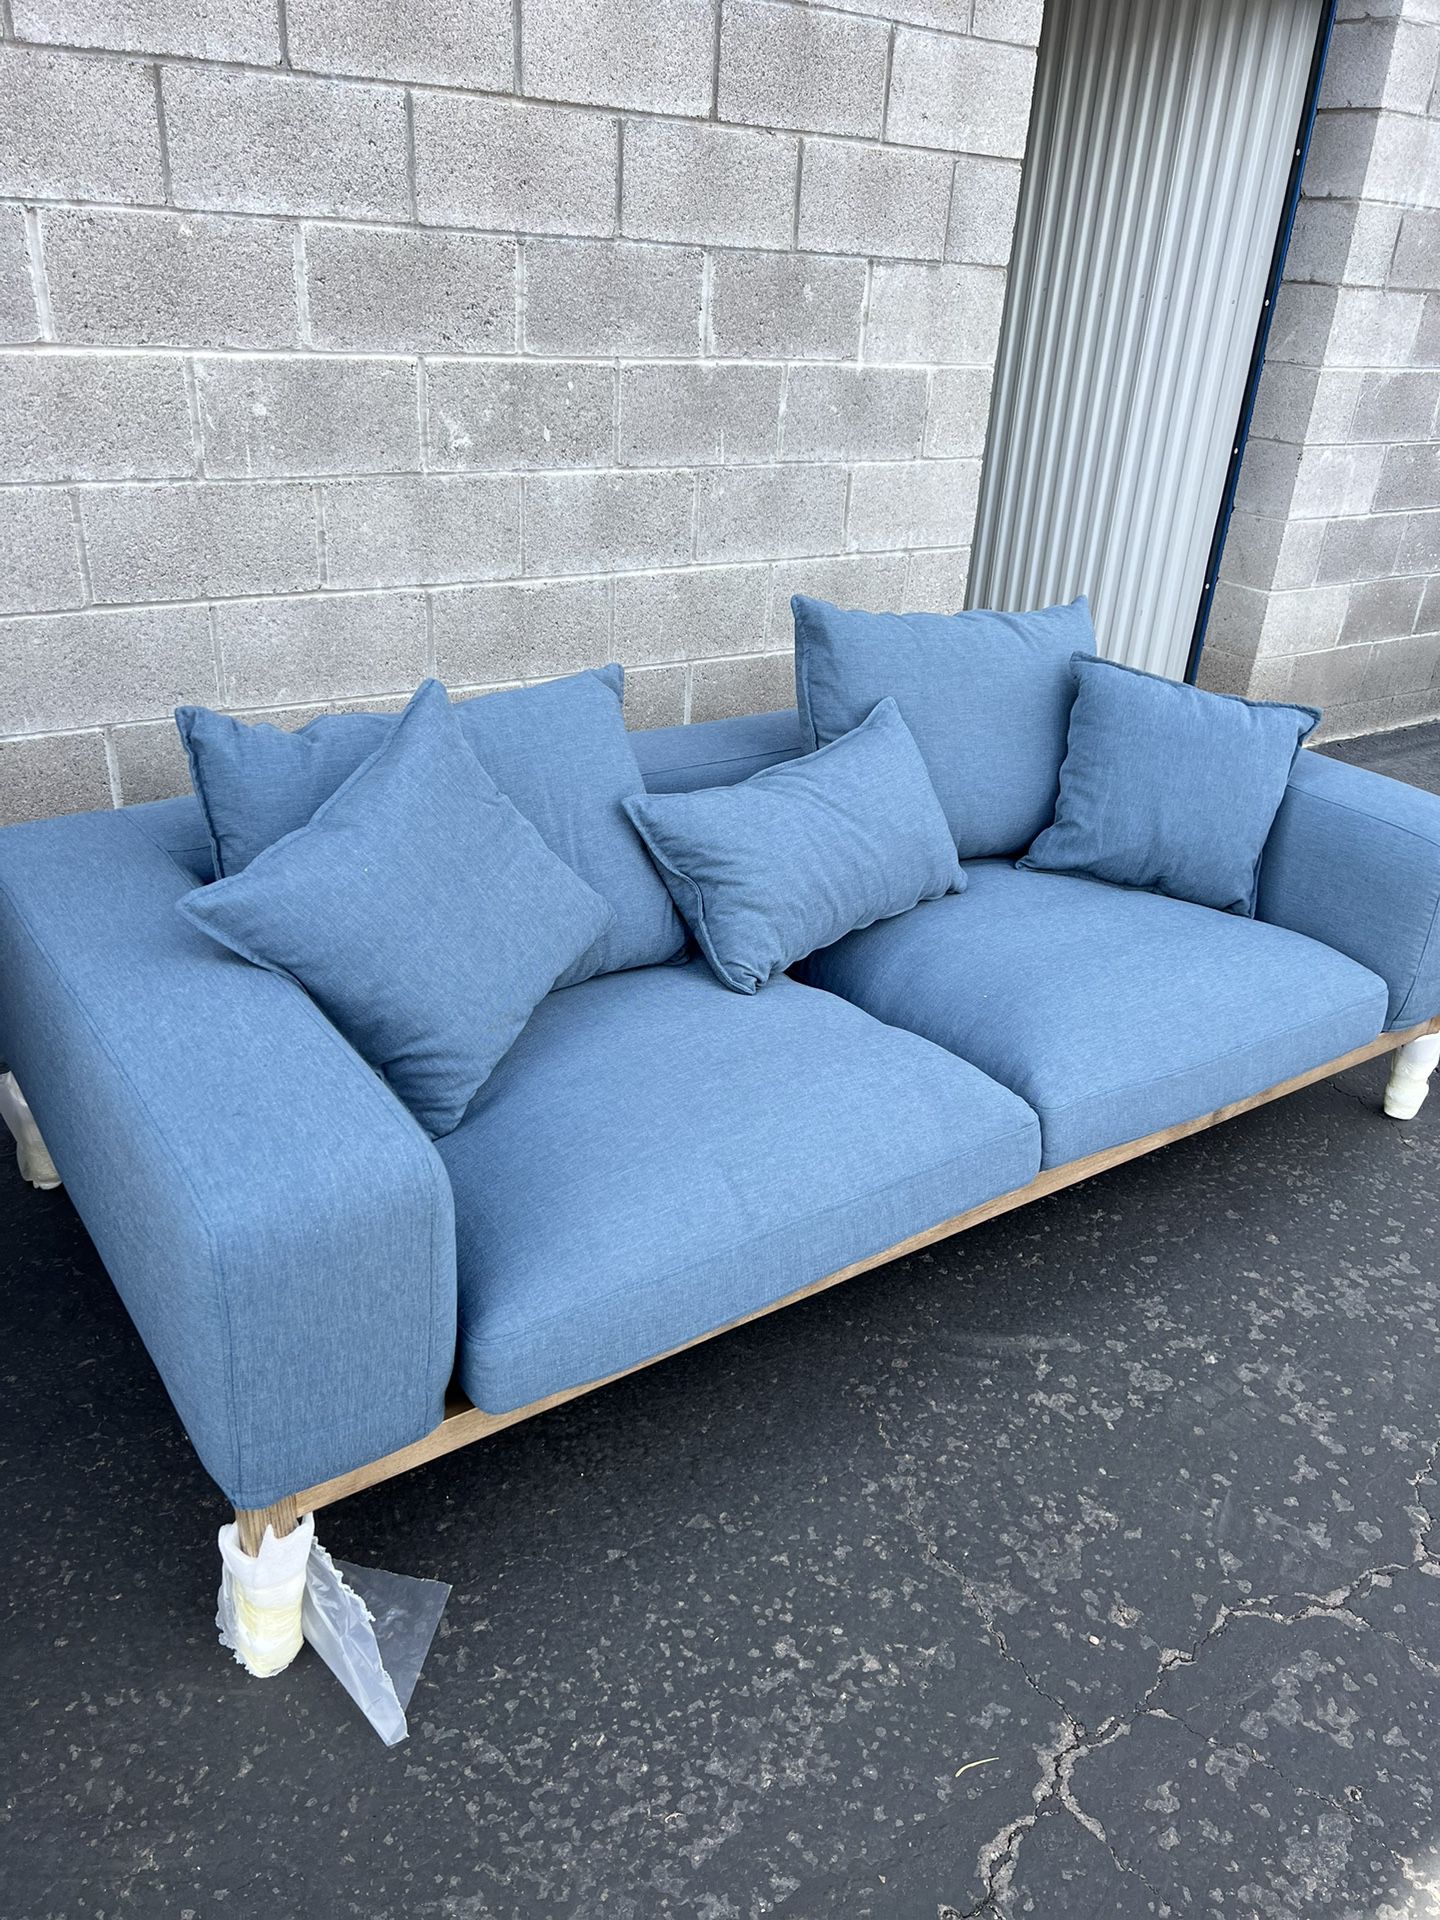 Tileston Sofa By Oliver Space // Modern Contemporary Blue Sofa - BRAND NEW IN BOX 